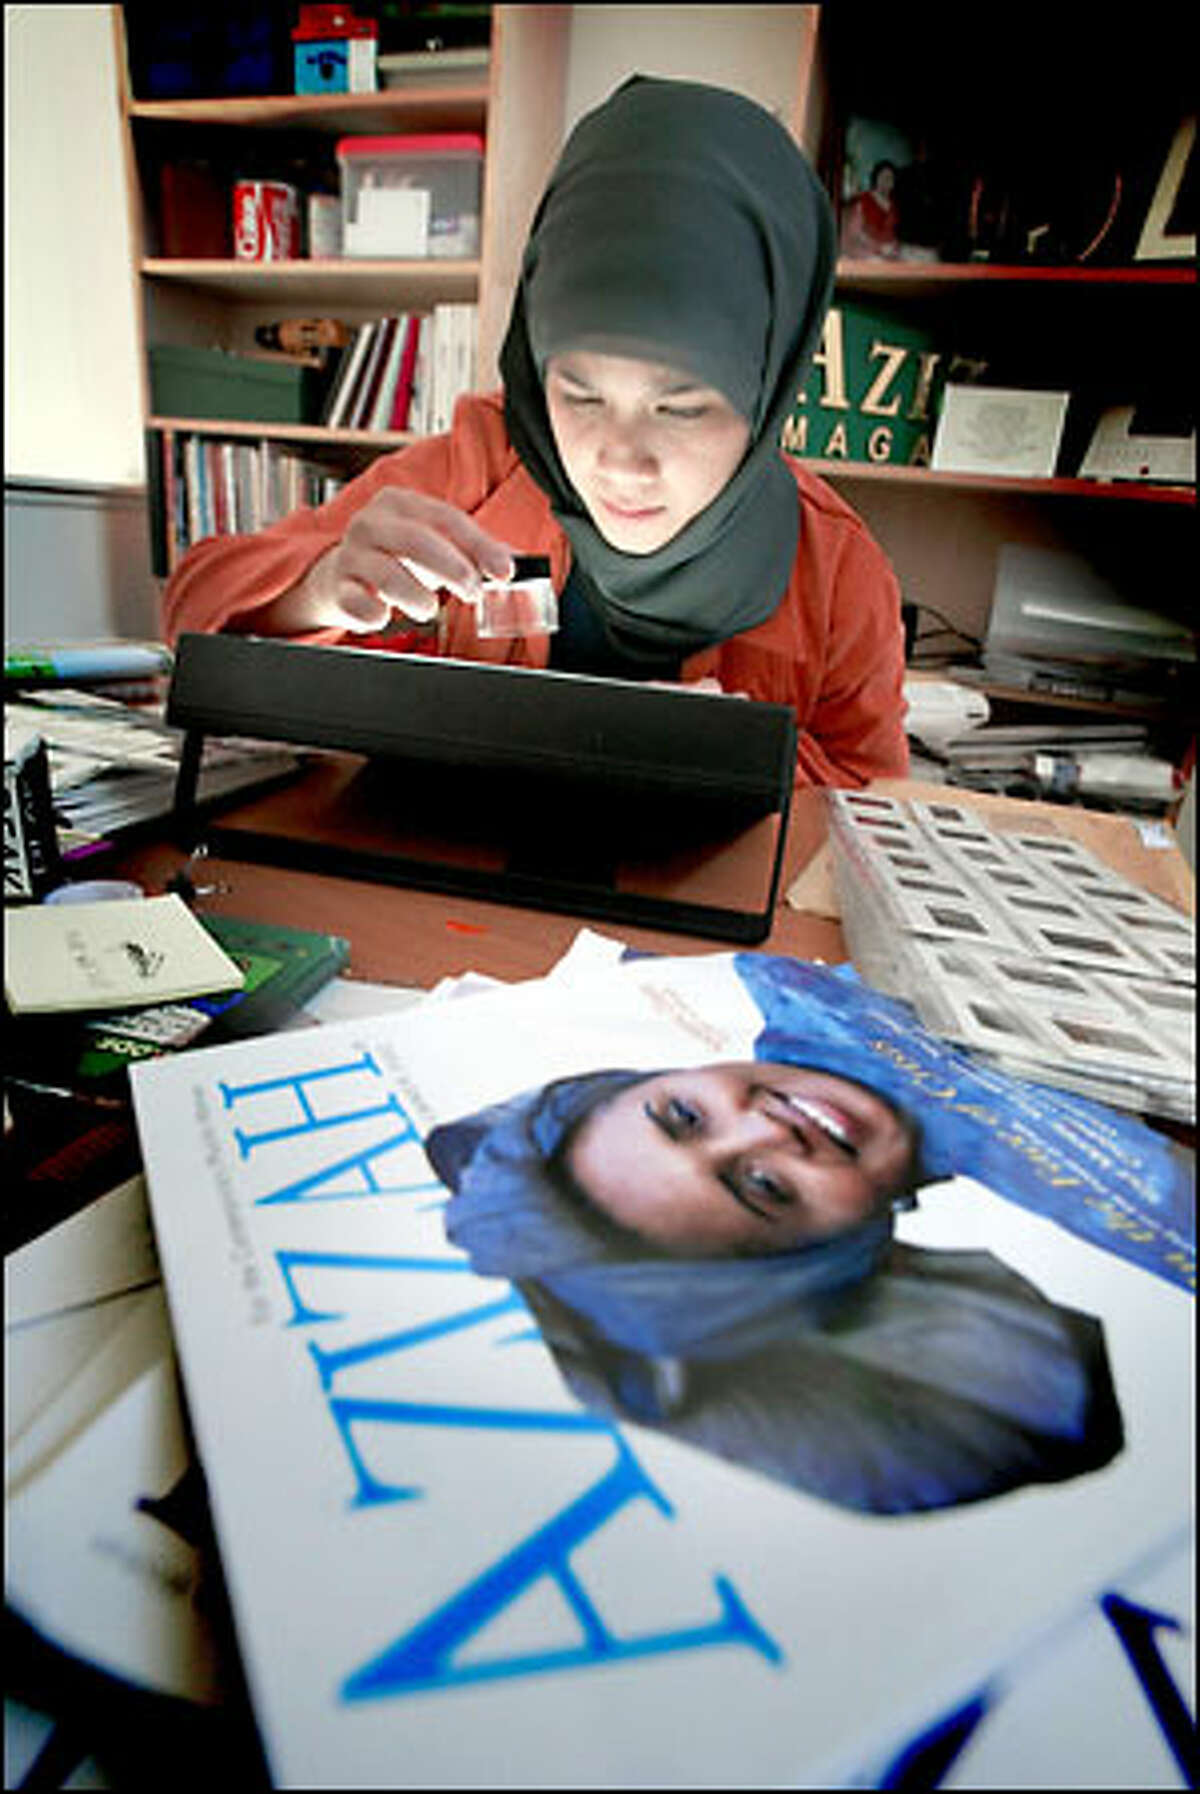 Marlina Soerakoesoemah, creative director for Azizah magazine, edits fashions pictures for the magazine in her Redmond home office. "You still hear horrible stories about (Muslim and Arab) people being profiled and harassed," she says.